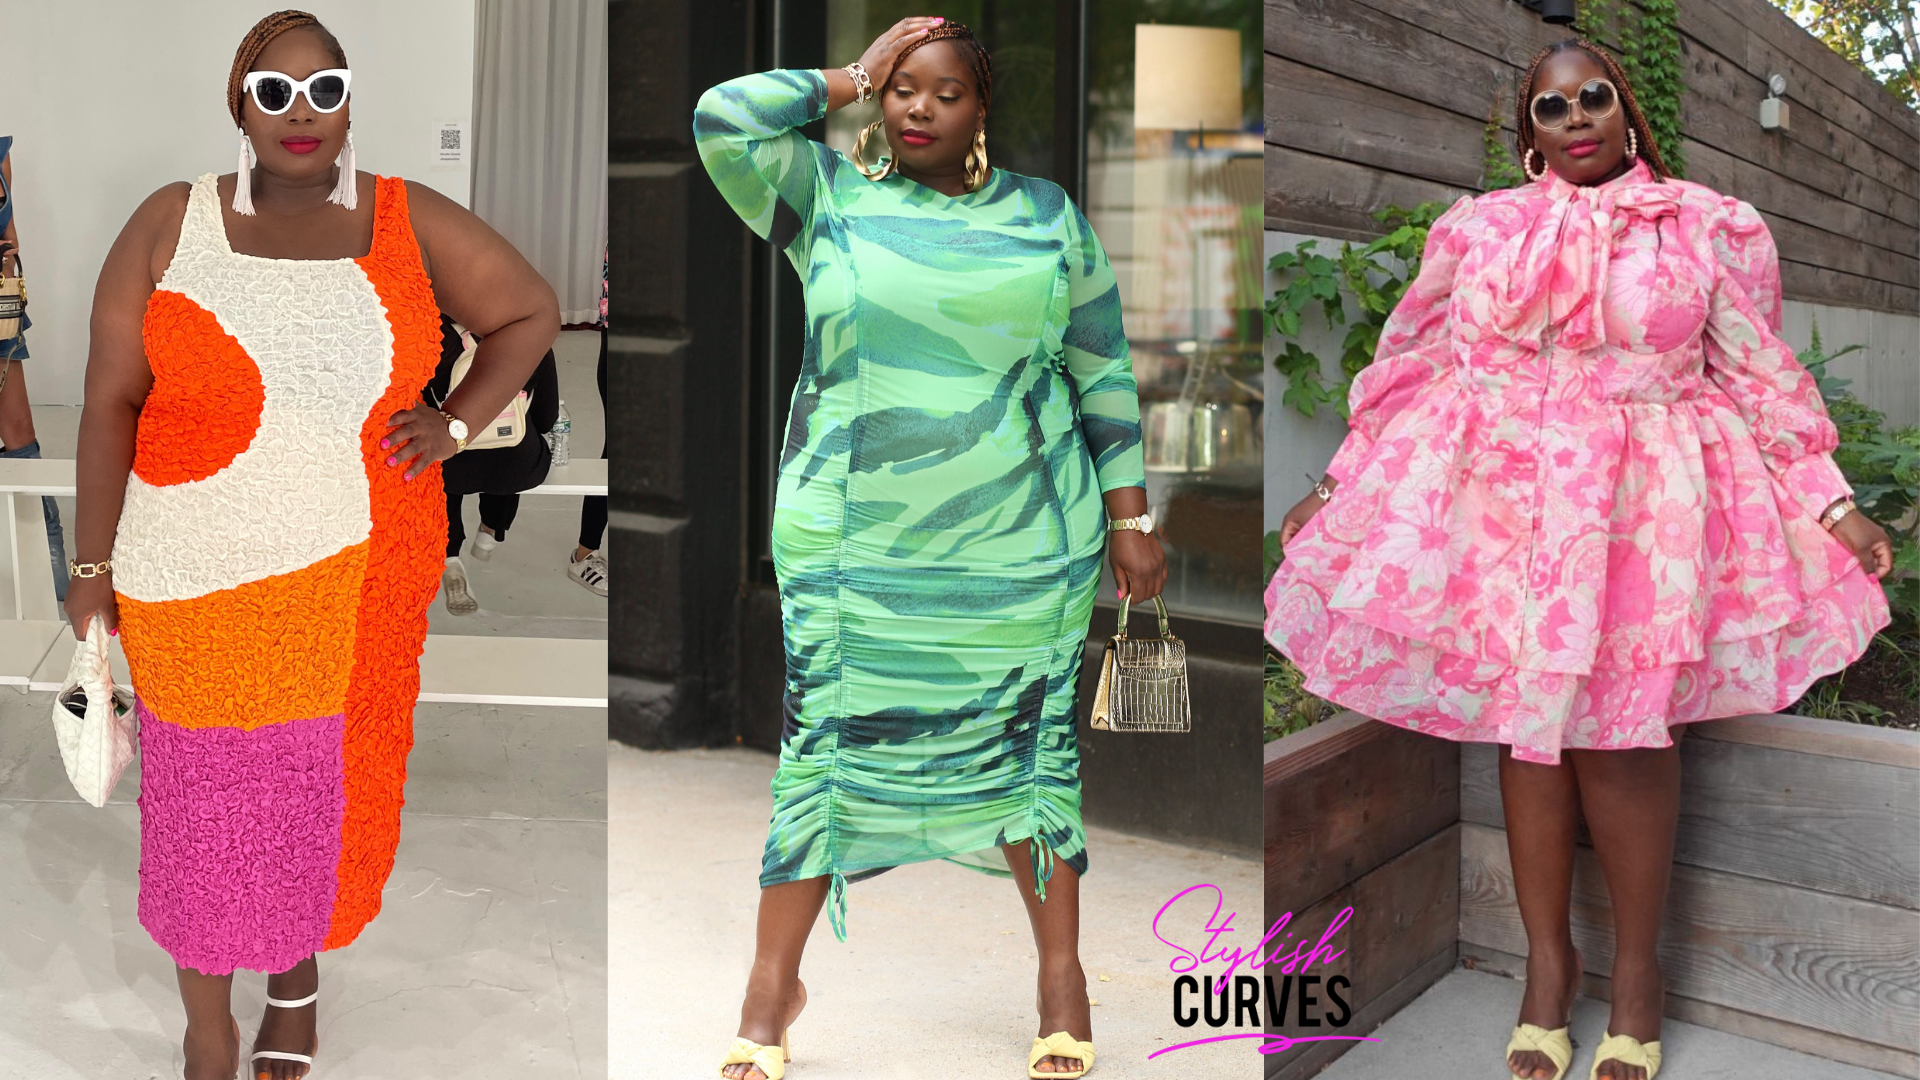 https://stylishcurves.com/wp-content/uploads/2022/09/new-york-fashion-week-plus-size-outfits-1.png